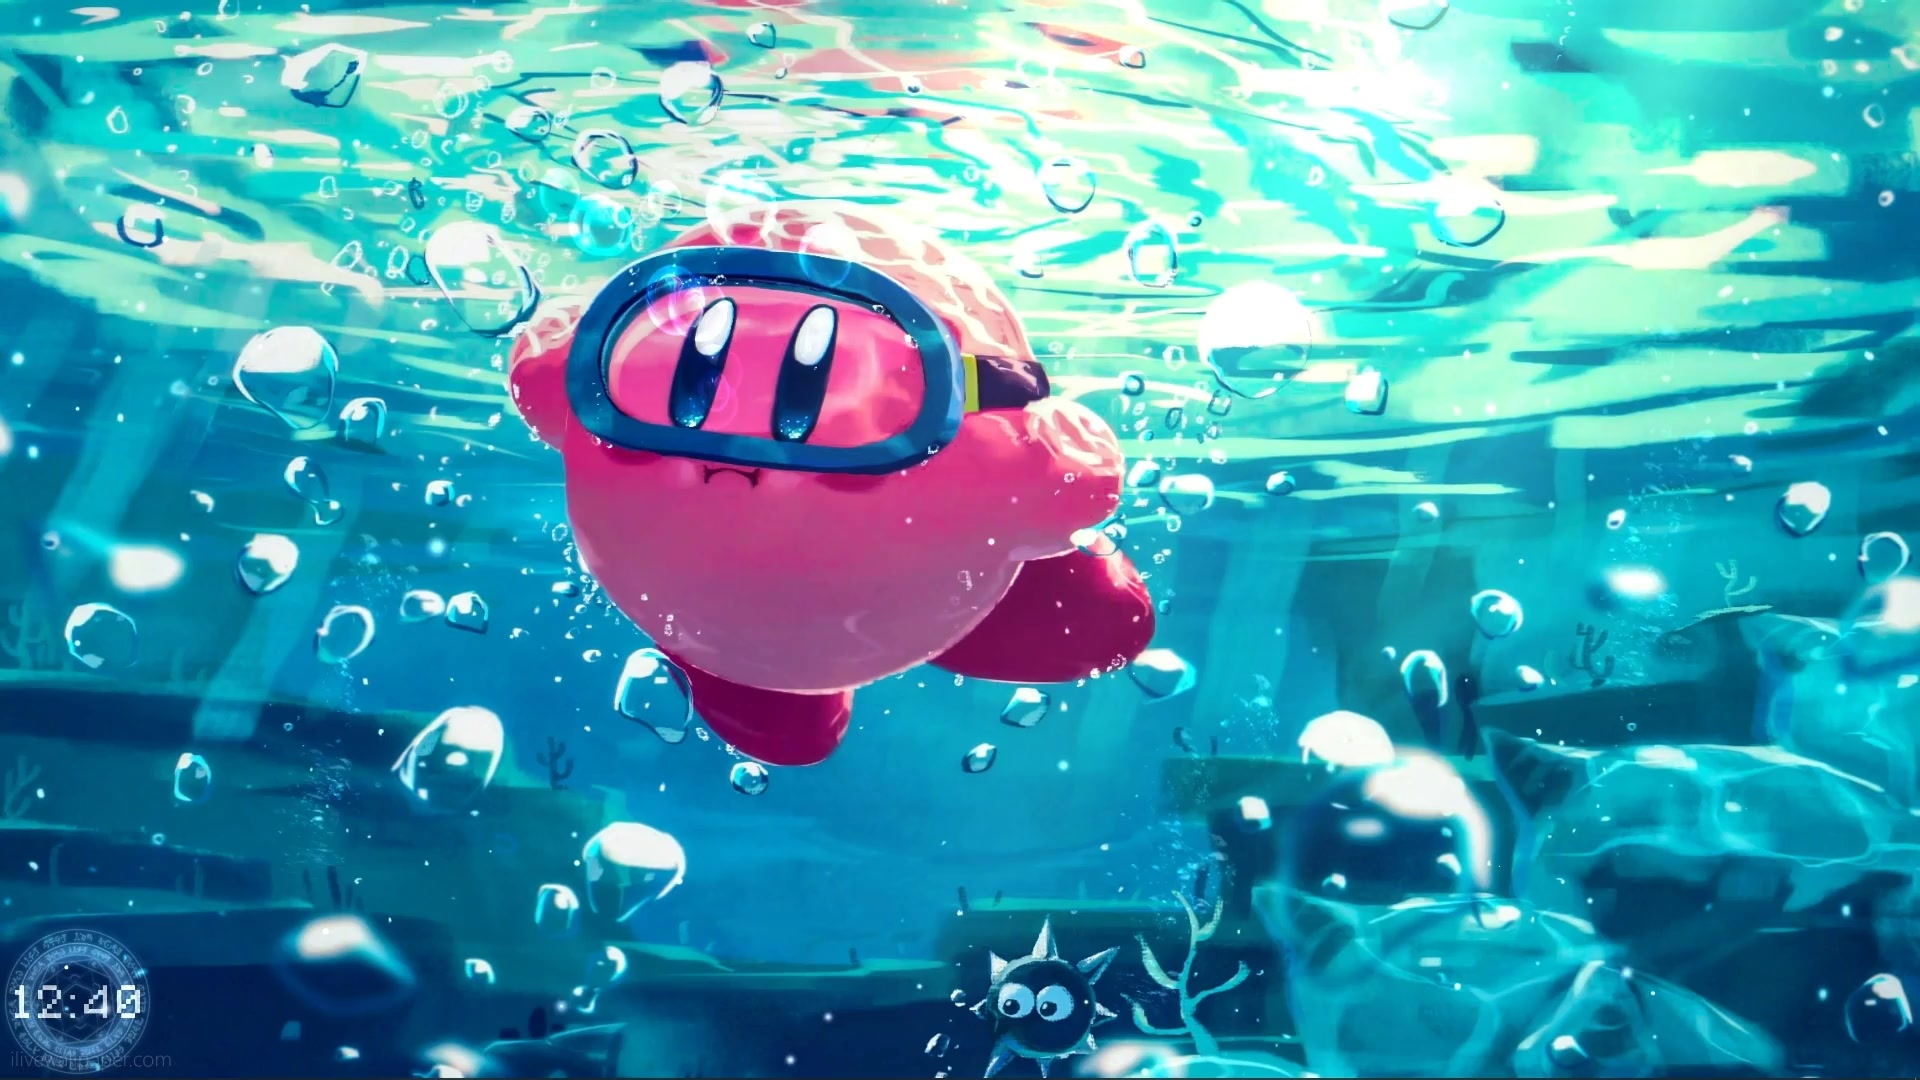 Kirby Underwater Live Wallpaper | 1920x1080 - Rare Gallery HD Live  Wallpapers